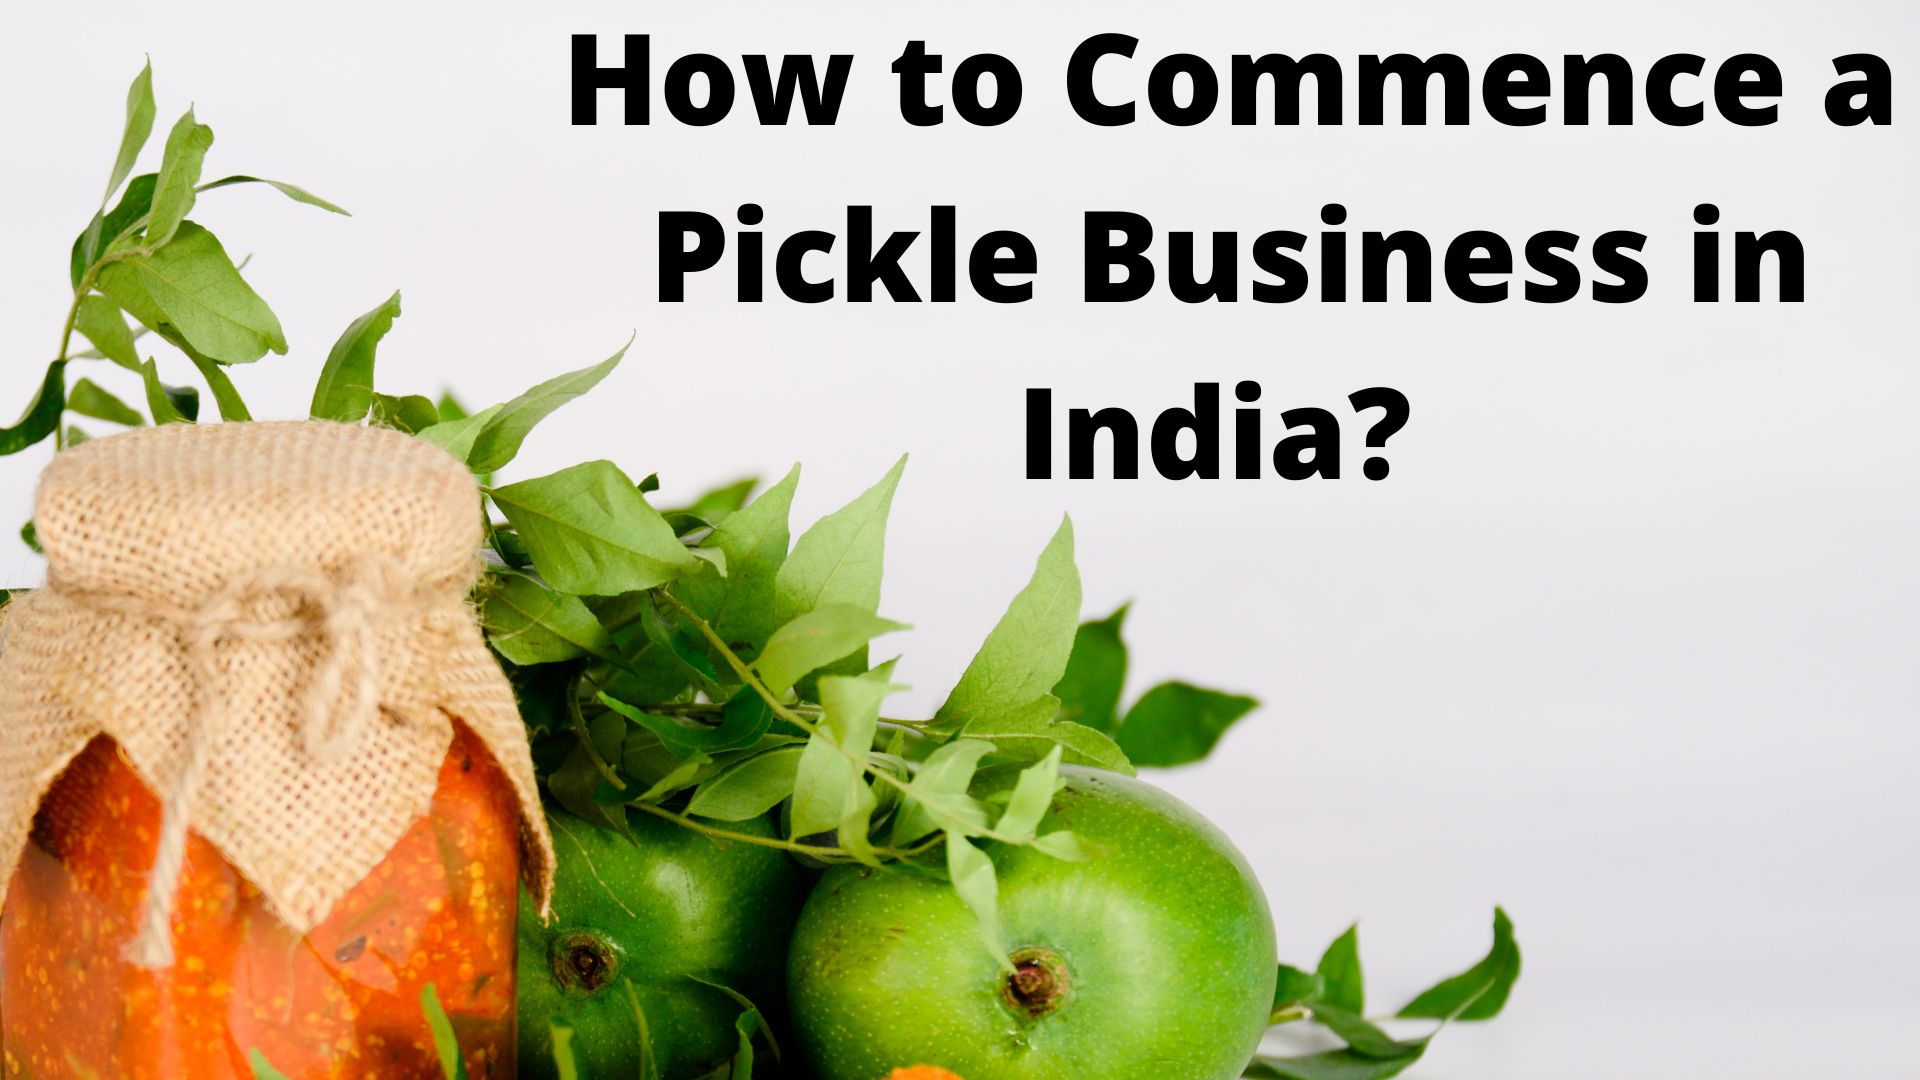 How to Commence a Pickle Business in India